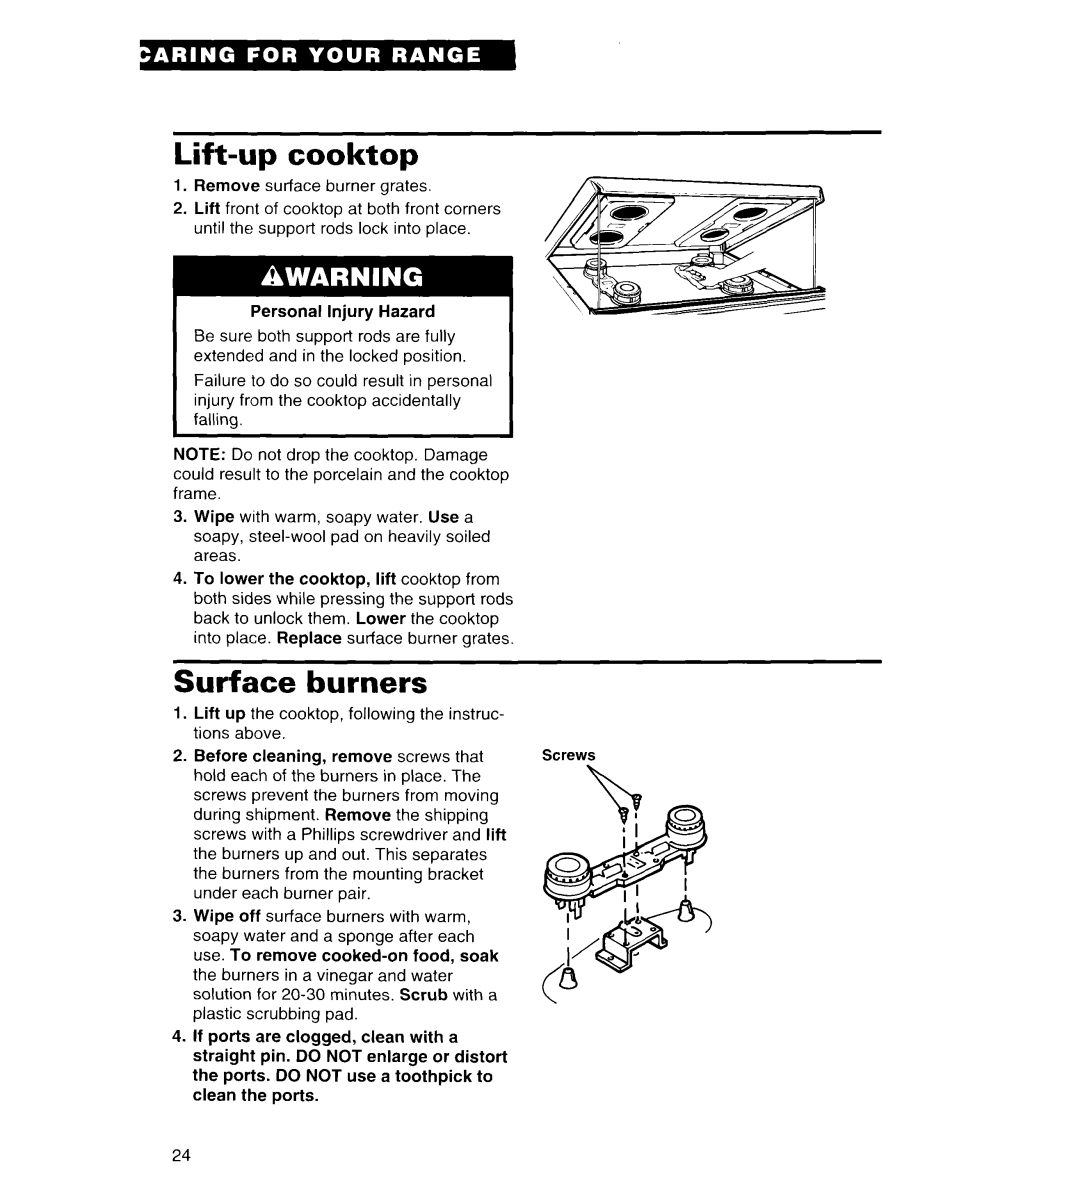 Whirlpool FGS385B important safety instructions Lift-upcooktop, Surface burners 